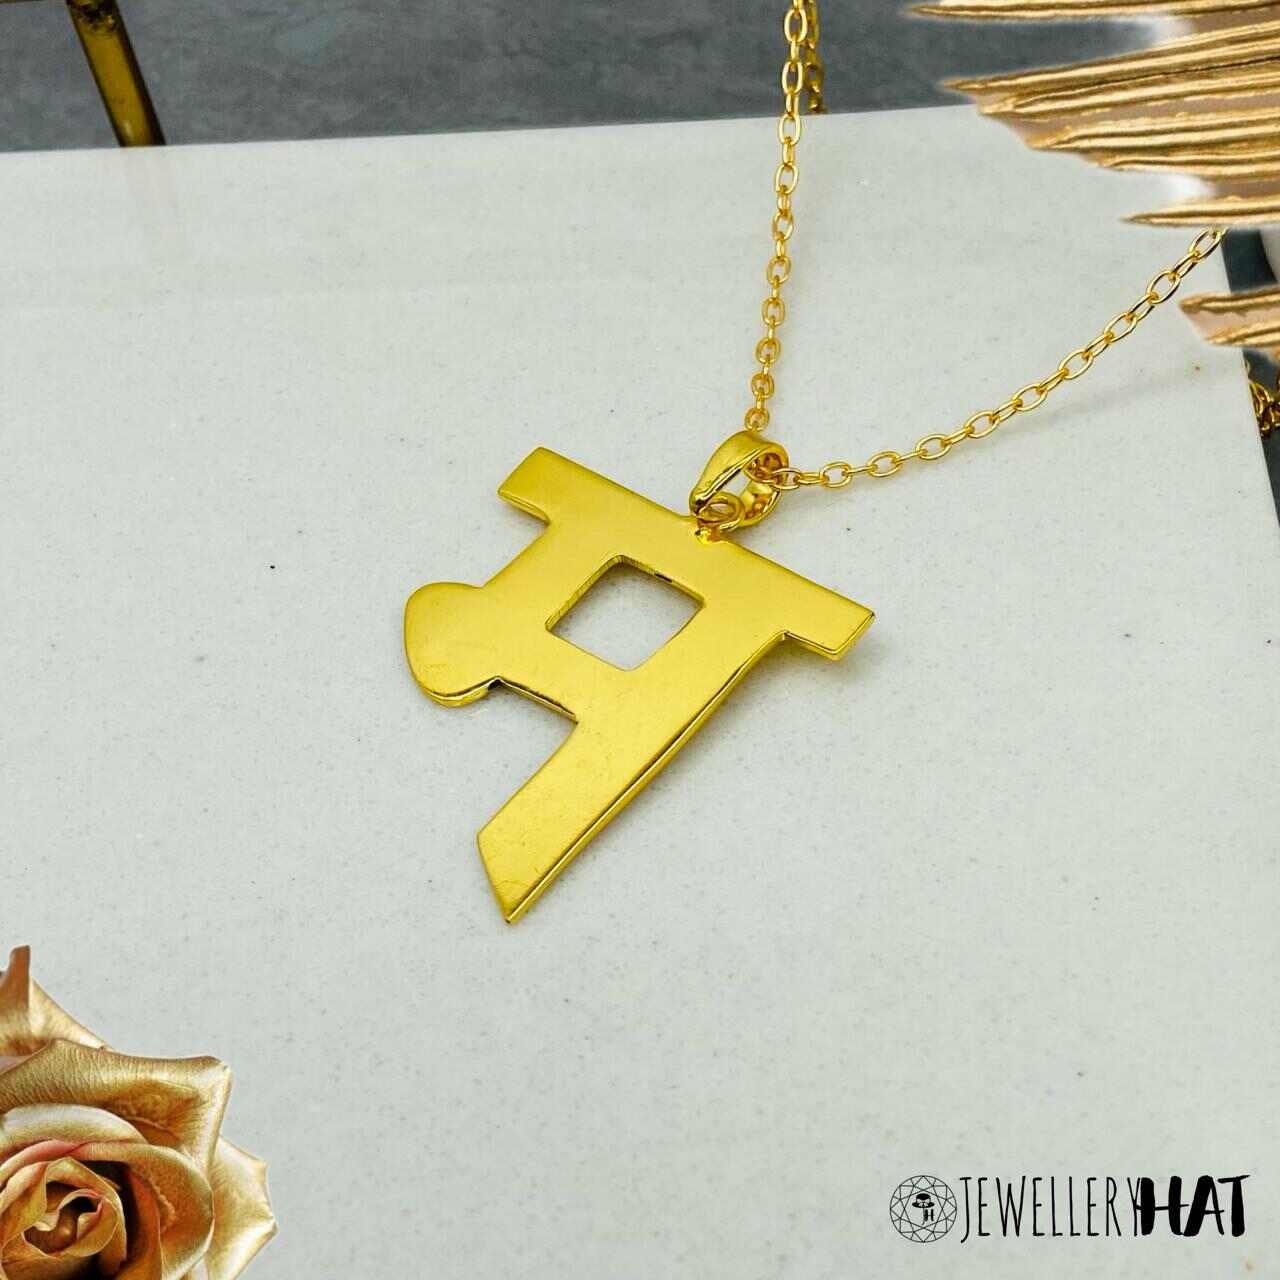 Necklace in Hindi | Gold Plated Hindi Necklace for Women | Artificial Jewellery